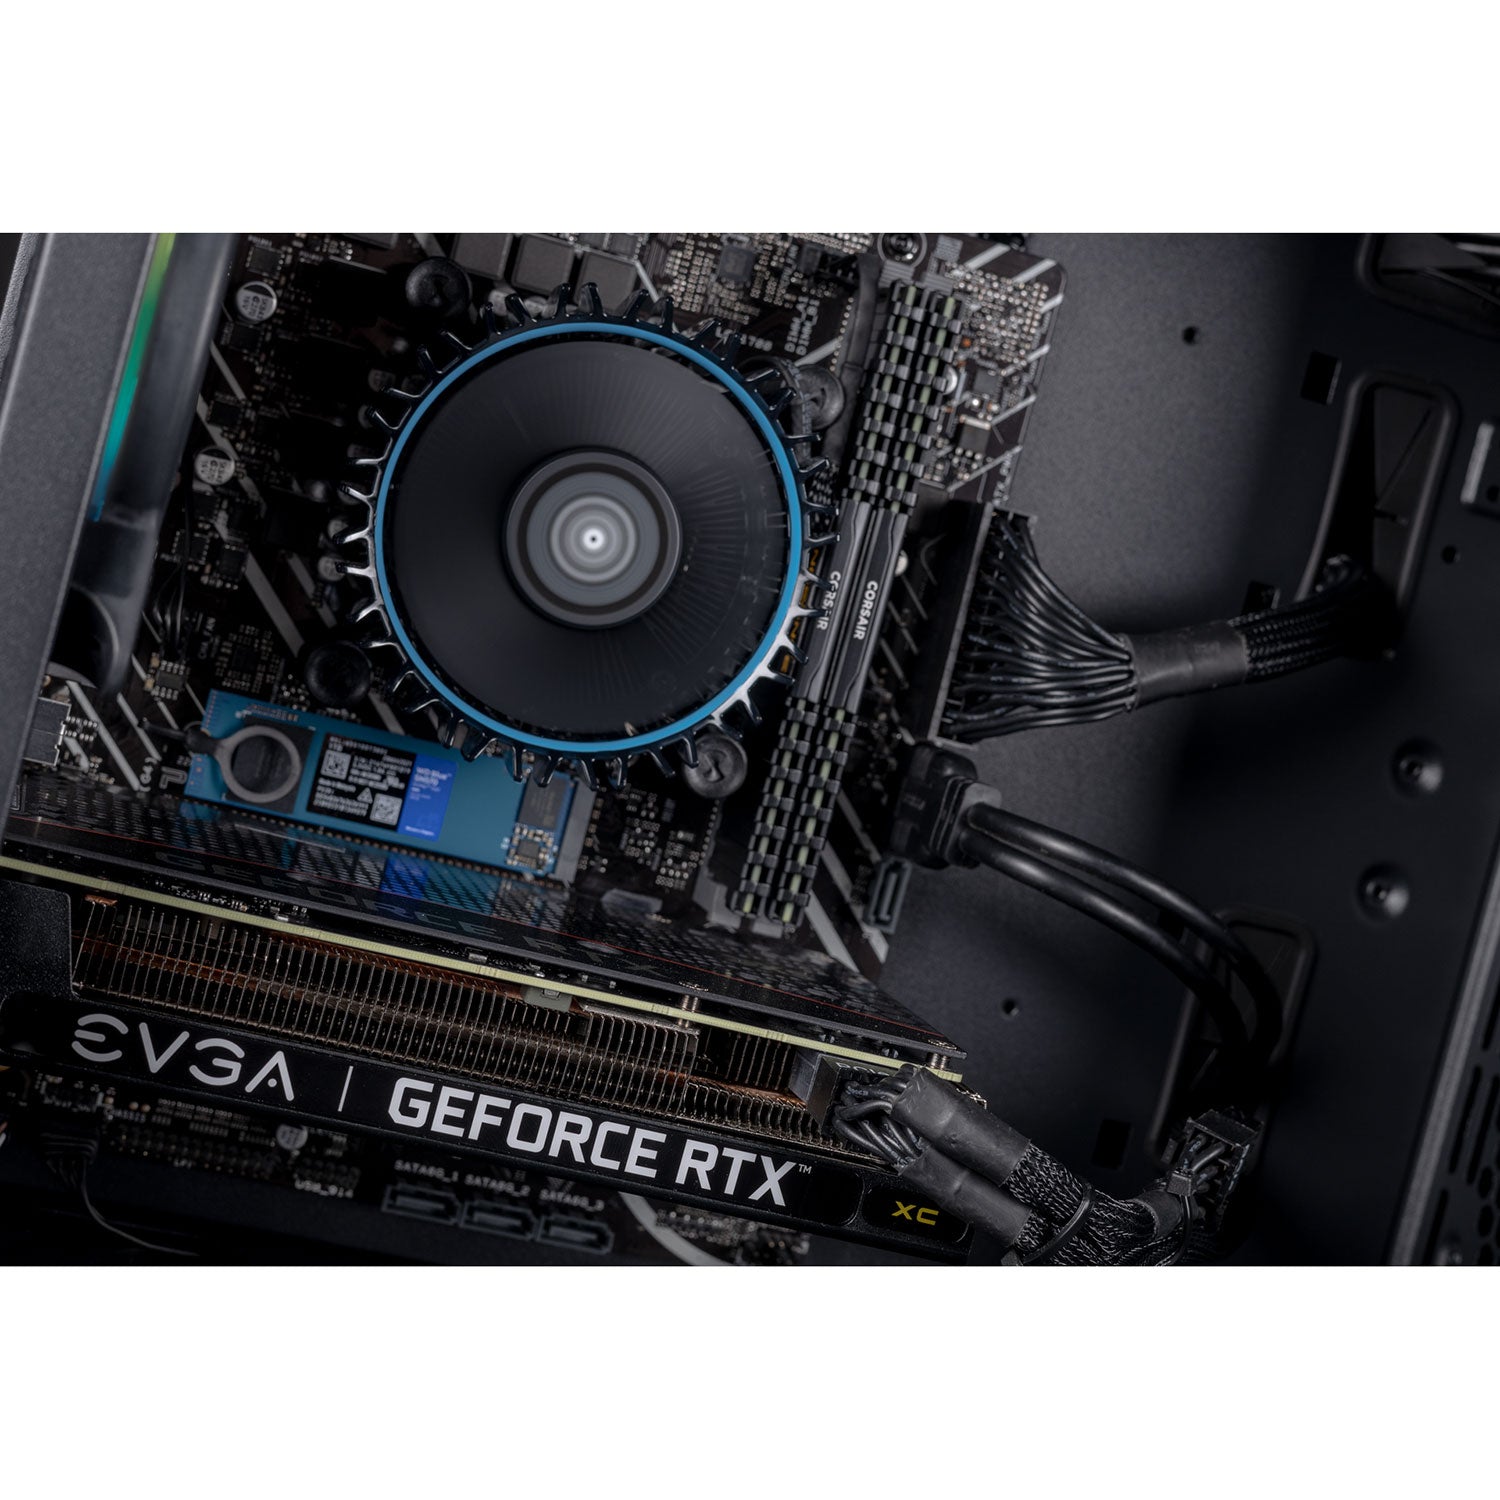 Gaming PC with NVIDIA GeForce RTX 3060 and Intel Core i5 12400F